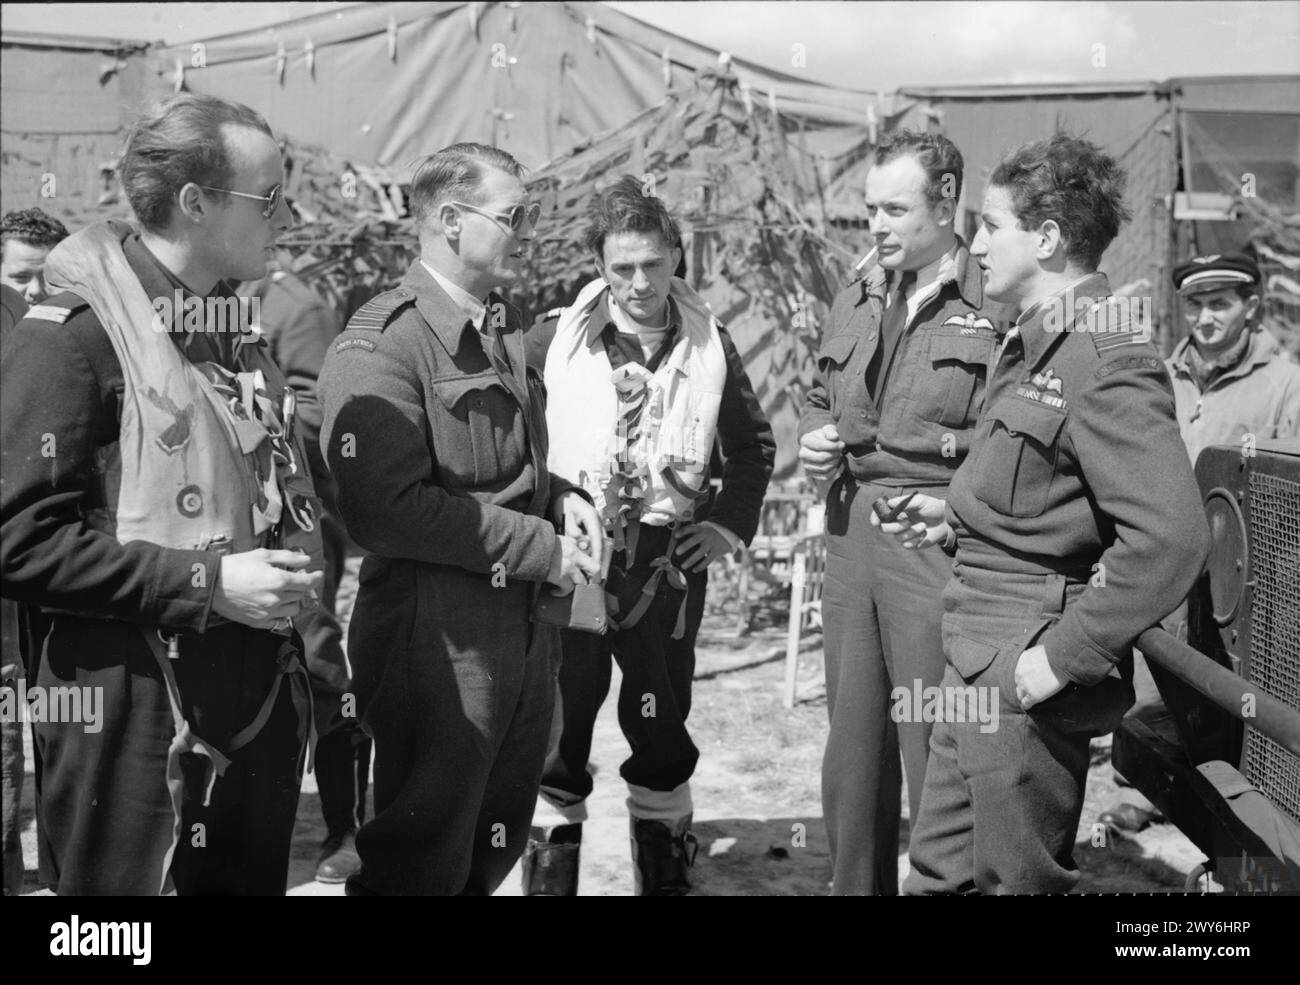 ROYAL AIR FORCE: 2ND TACTICAL AIR FORCE, 1943-1945 - Group Captain A G Malan (second from left), Commanding Officer of No 145 (Free French) Wing discusses the operational situation on the morning of 'D-Day' with some of his pilots at Merston, Sussex. On the left stands Free French pilot, Lieutenant Raoul Duval; second from the right is the Wing Leader, Wing Commander W V Crawford-Compton; third right is Commandant C Martell, Commanding Officer of No. 341 (Free French) Squadron RAF. , Malan, Adolph Gysbert, Royal Air Force, Maintenance Unit, 201 Stock Photo